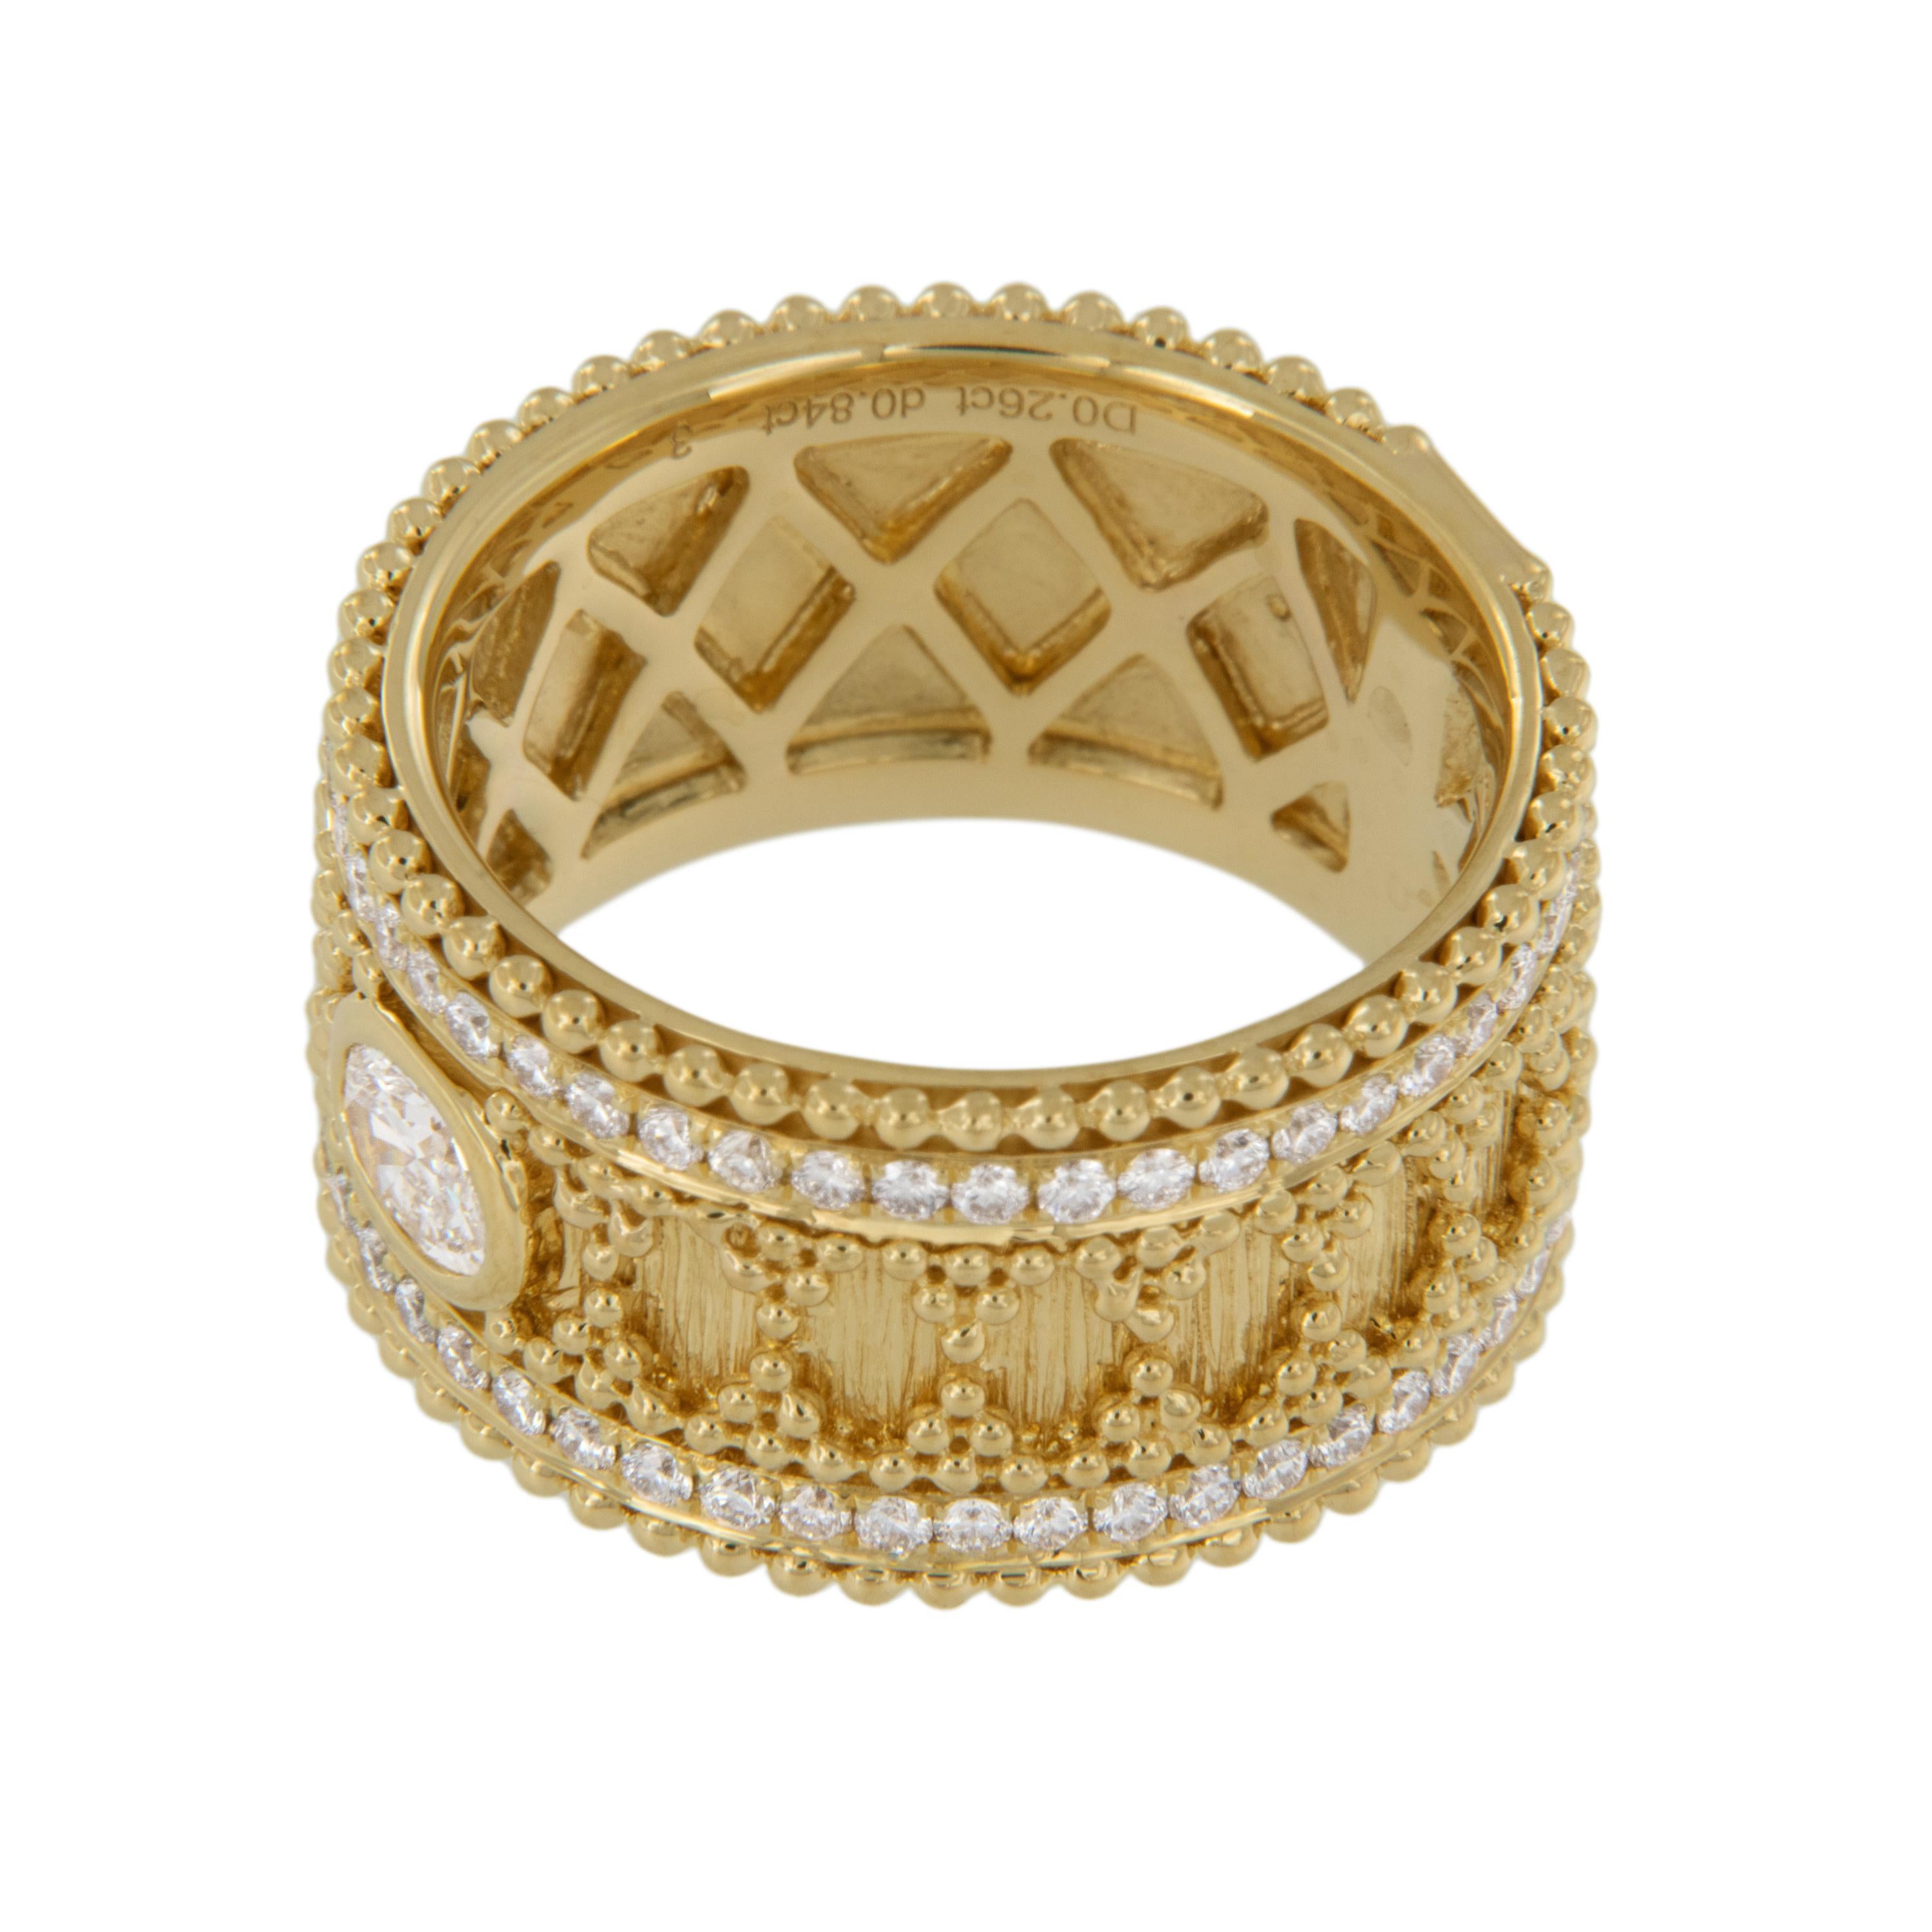 Made from royal 18 karat yellow gold in the classic Byzantine style with intricate granulated beading this knockout band stands out with a 0.29 Ctw oval VS, F-G bezel set diamond & 0.80 RBC diamonds edging it. Ring is a size 7.25, and is 11.33mm